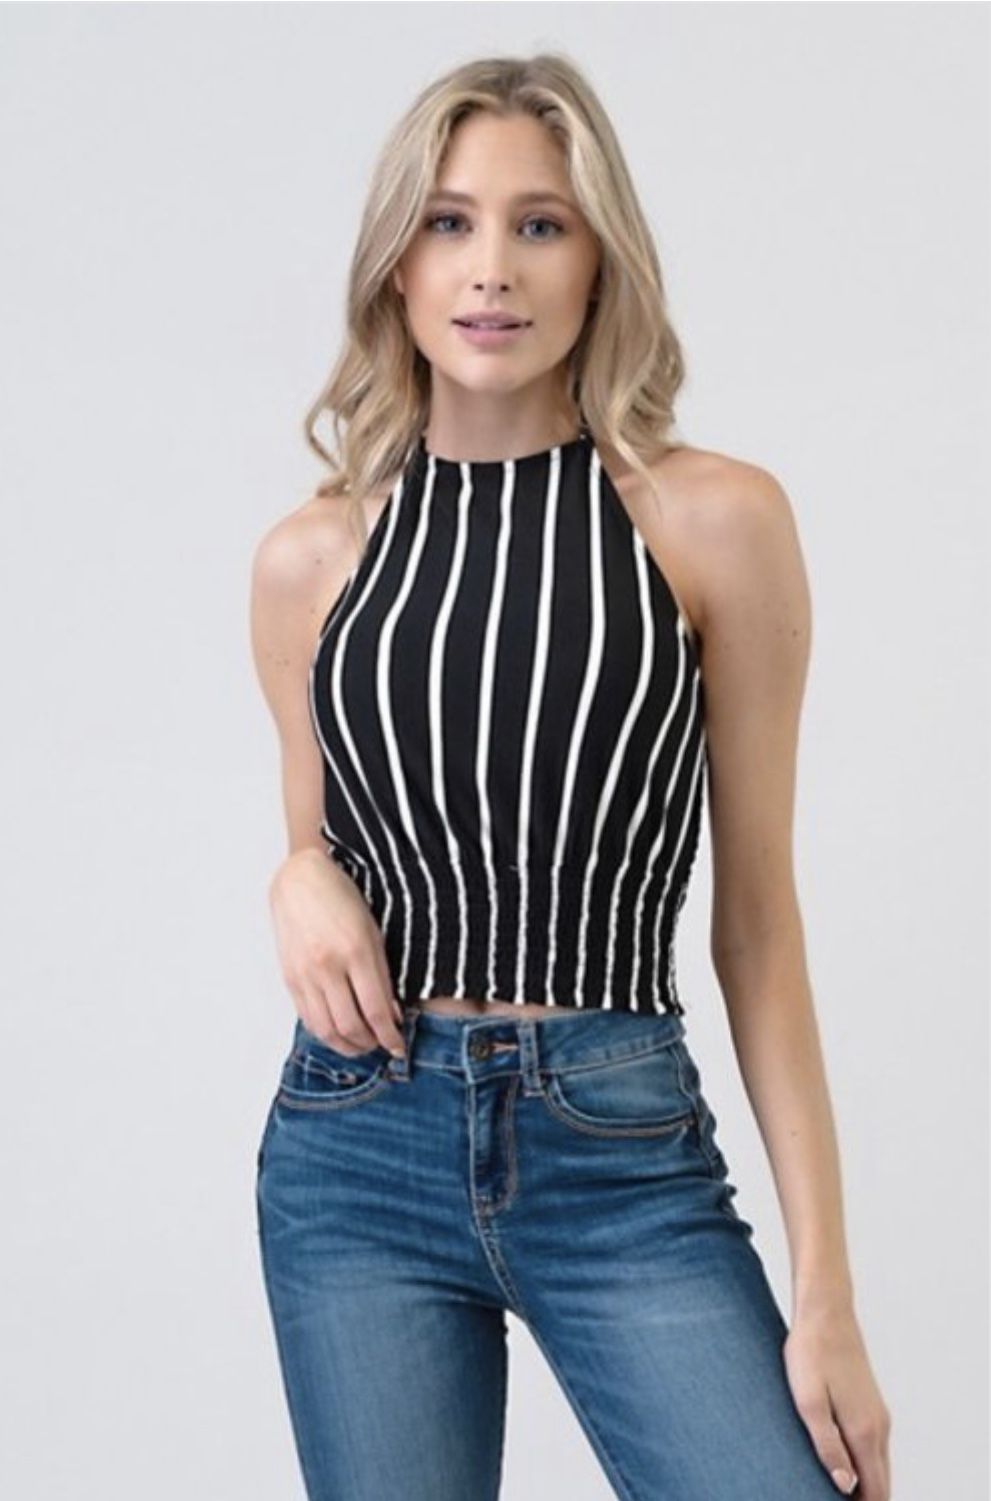 Black and white halter top